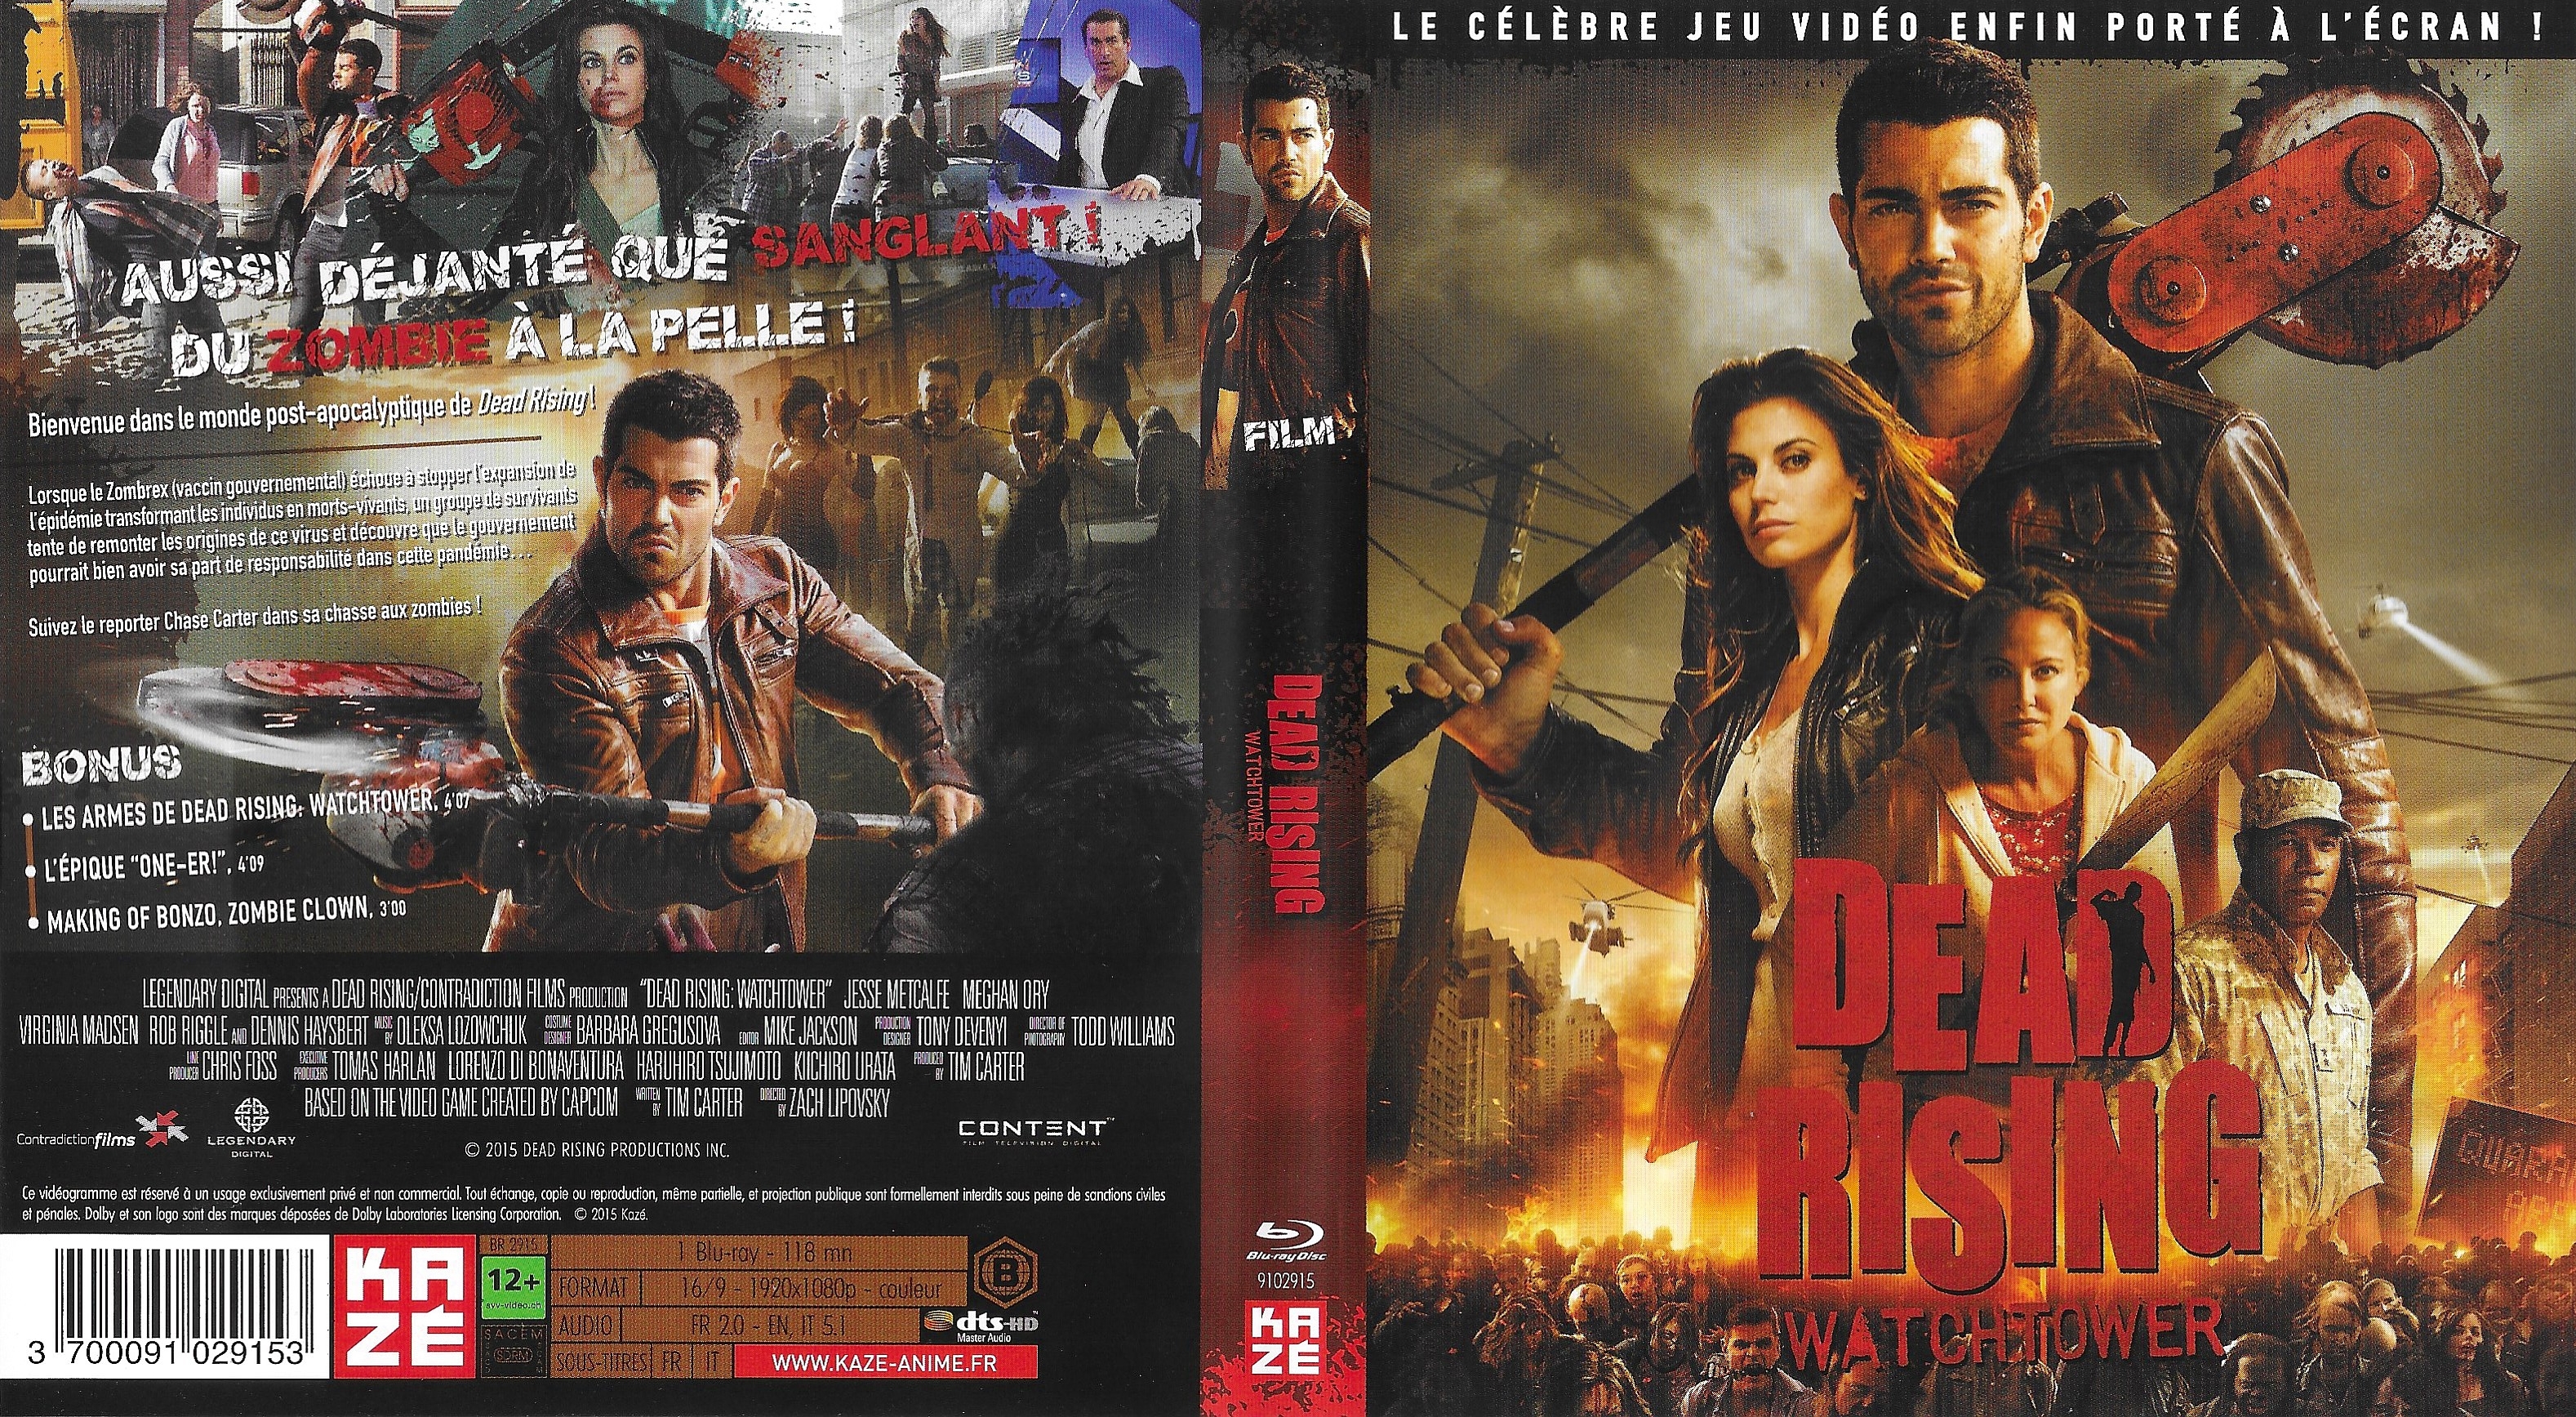 Jaquette DVD Dead rising watchtower (BLU-RAY)